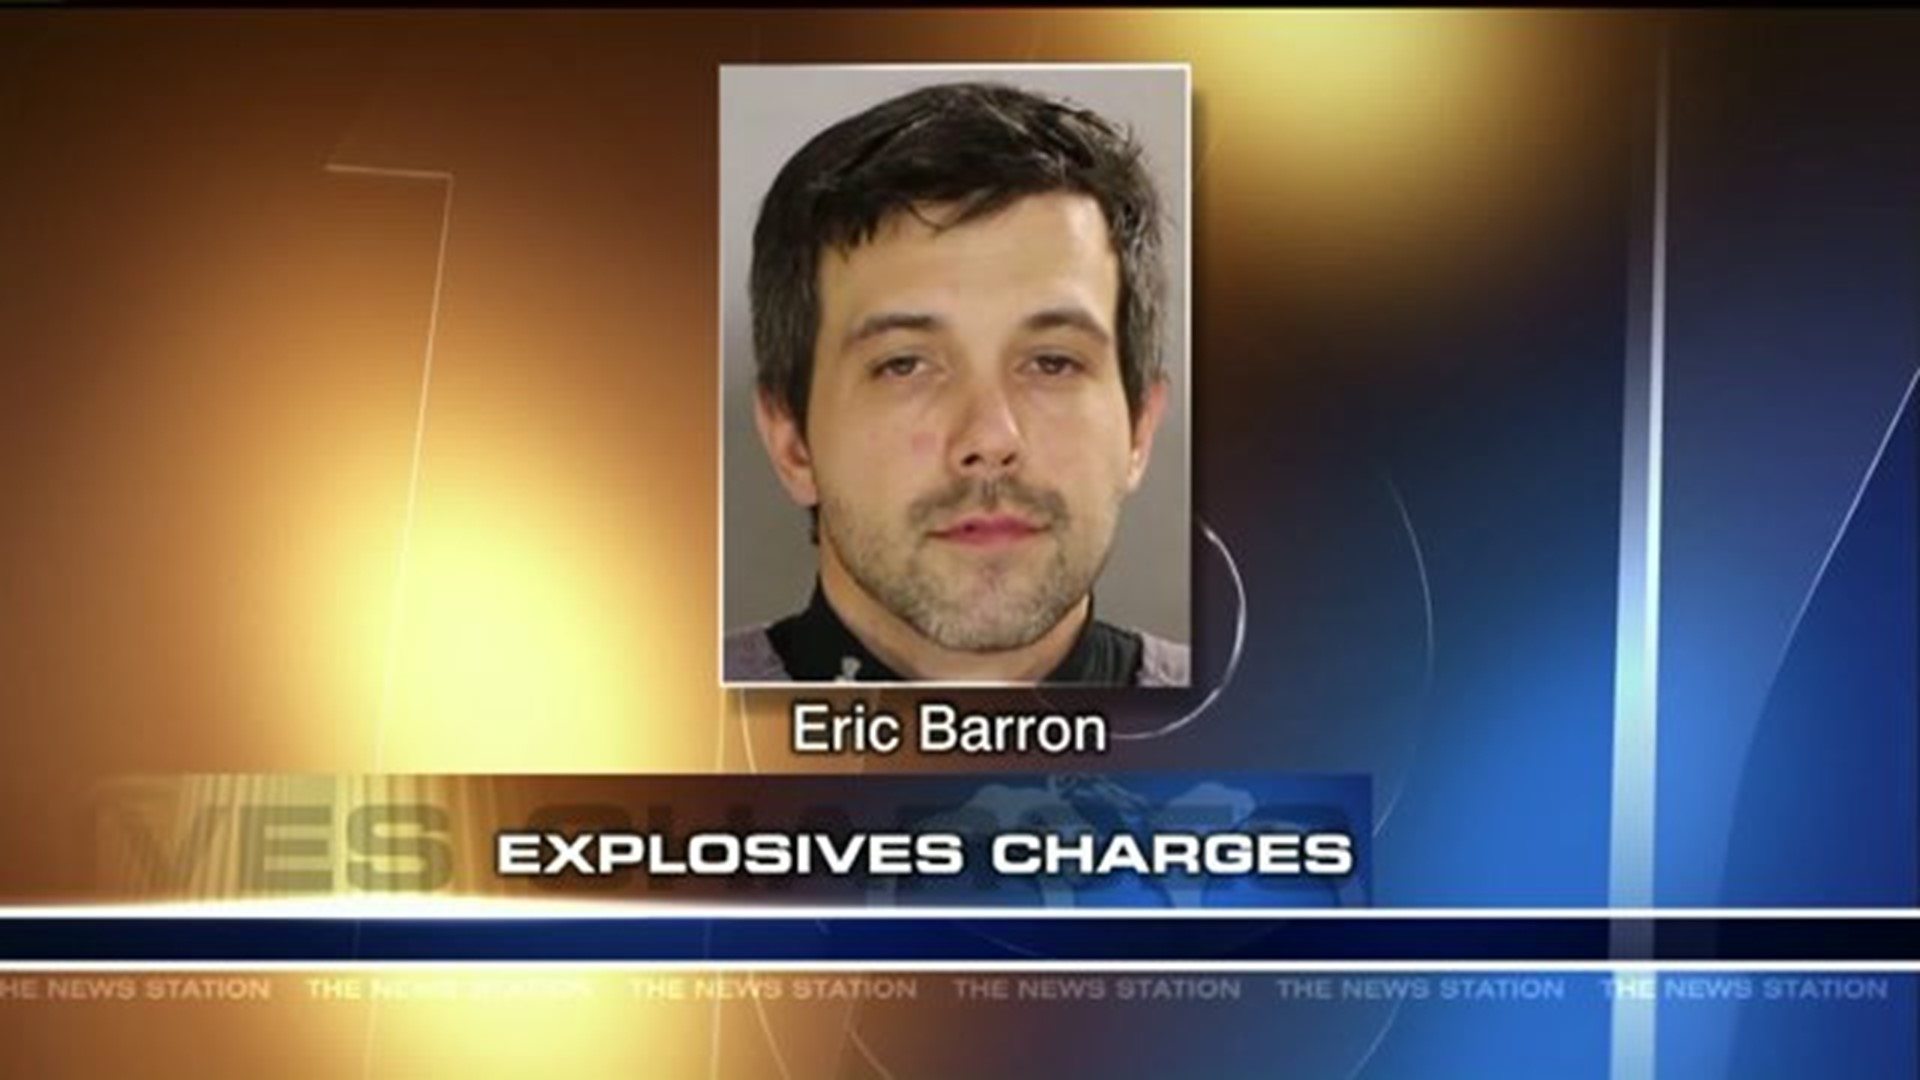 Police Arrest Man They Say Was Setting off Explosives in Carbondale